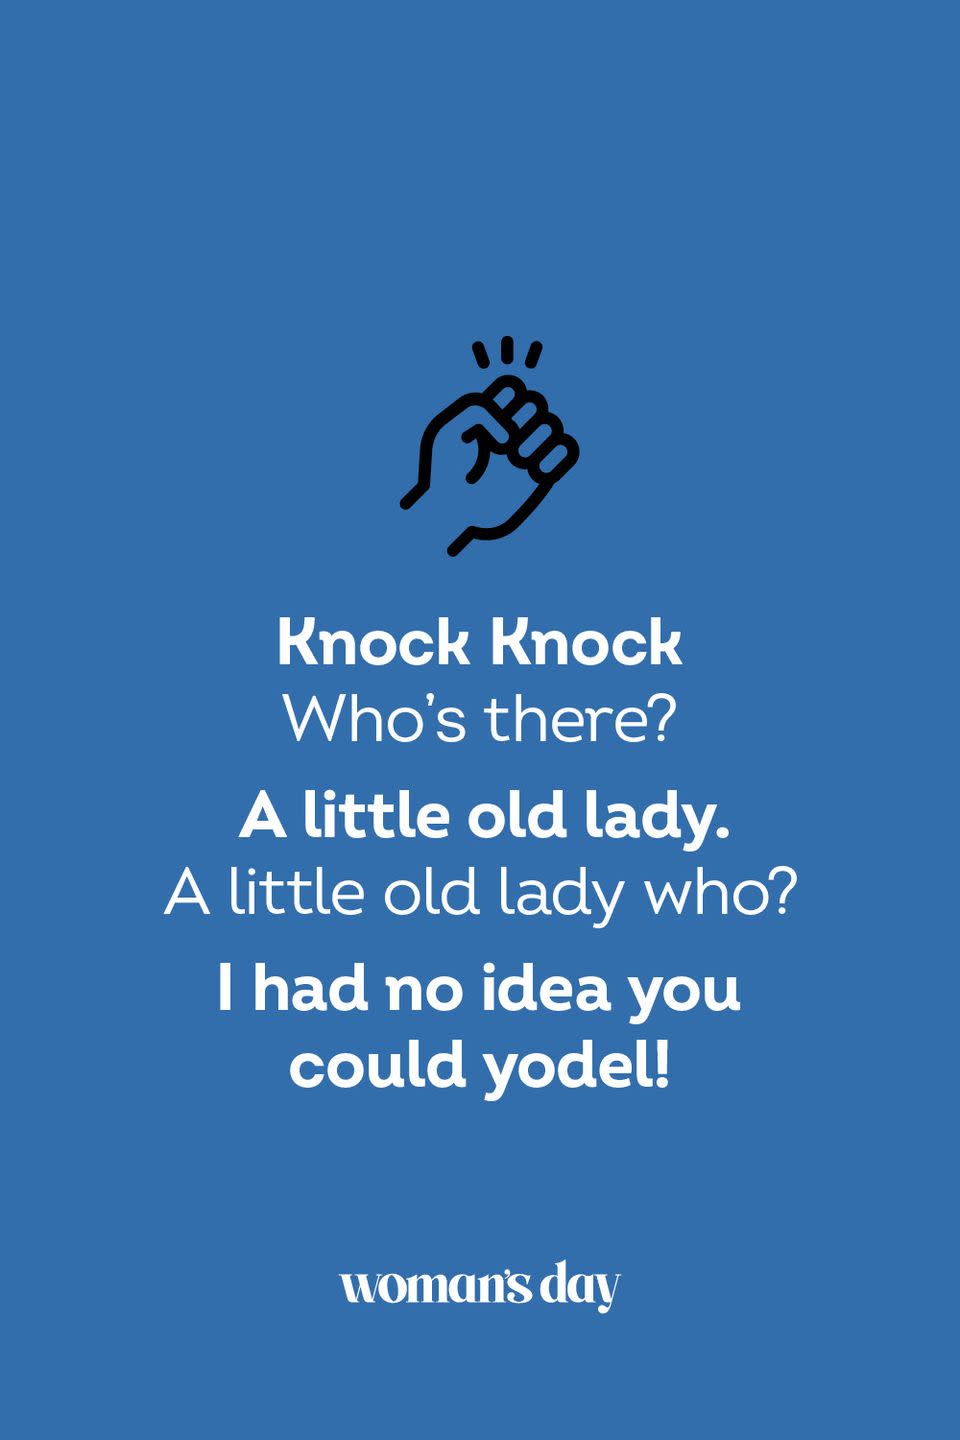 <p><strong>Knock Knock</strong></p><p><em>Who’s there? </em></p><p><strong>A little old lady.</strong></p><p><em>A little old lady who?</em></p><p><strong>I had no idea you could yodel!</strong></p>